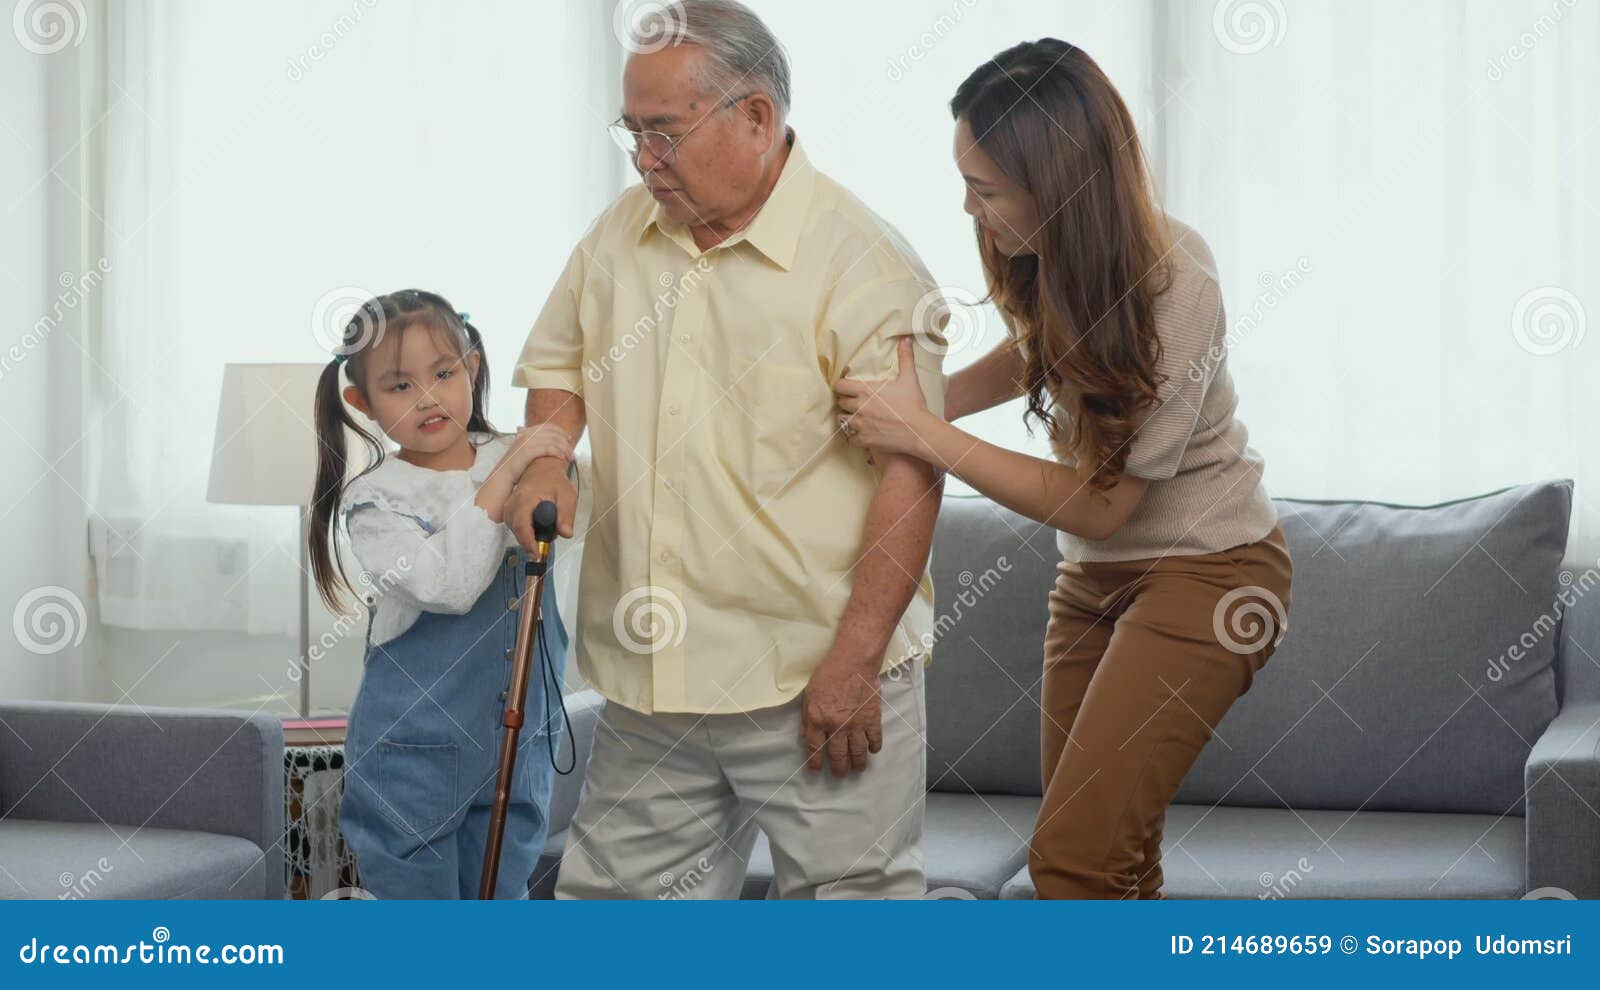 Daughter and Granddaughter Take Care Support Grandfather Who is Suffering from Knee Pain Got Walking Stock Video photo picture